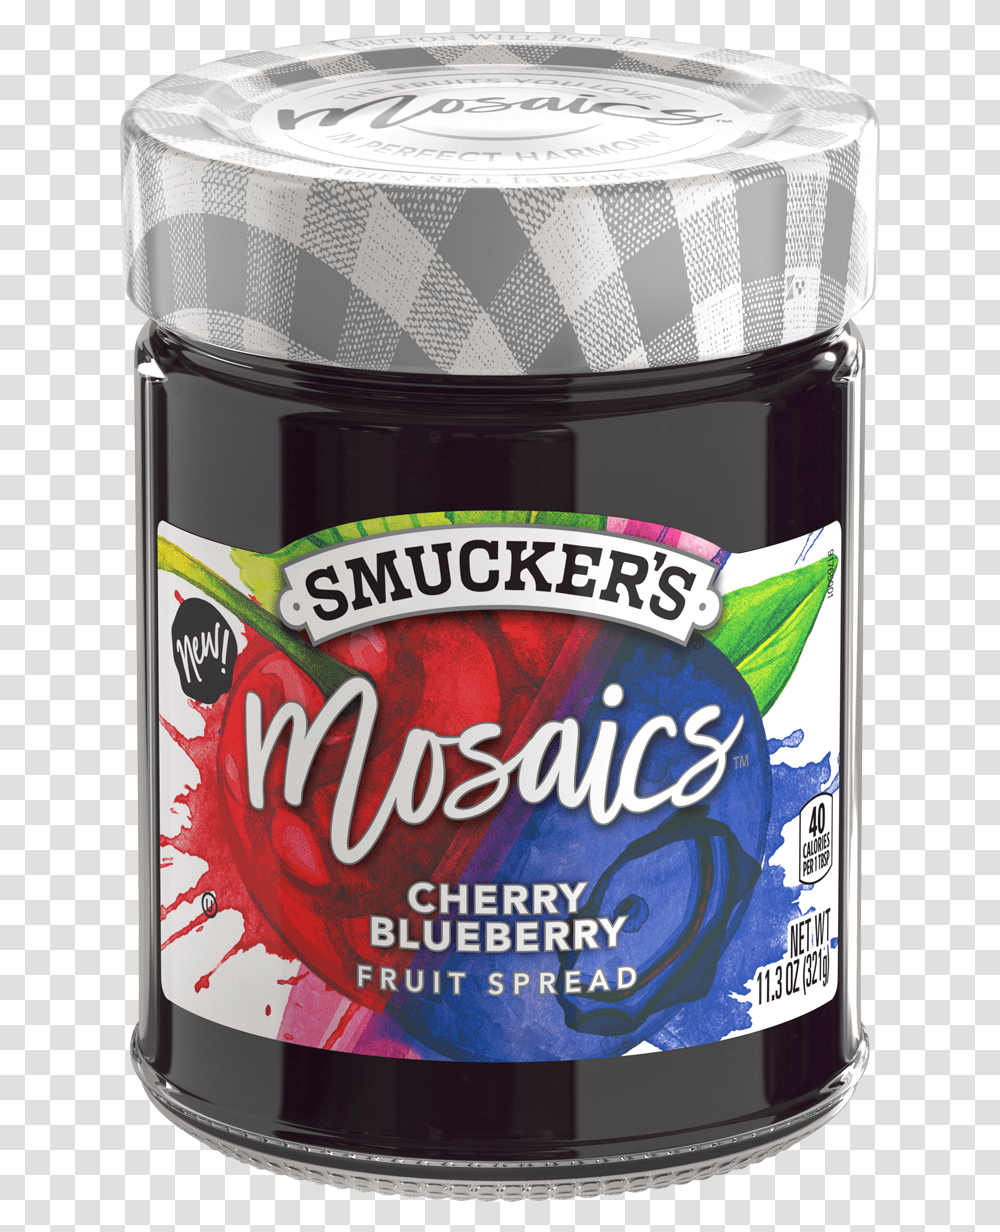 Cherry Blueberry Fruit Spread Smucker's Smuckers, Jam, Food, Beer, Alcohol Transparent Png